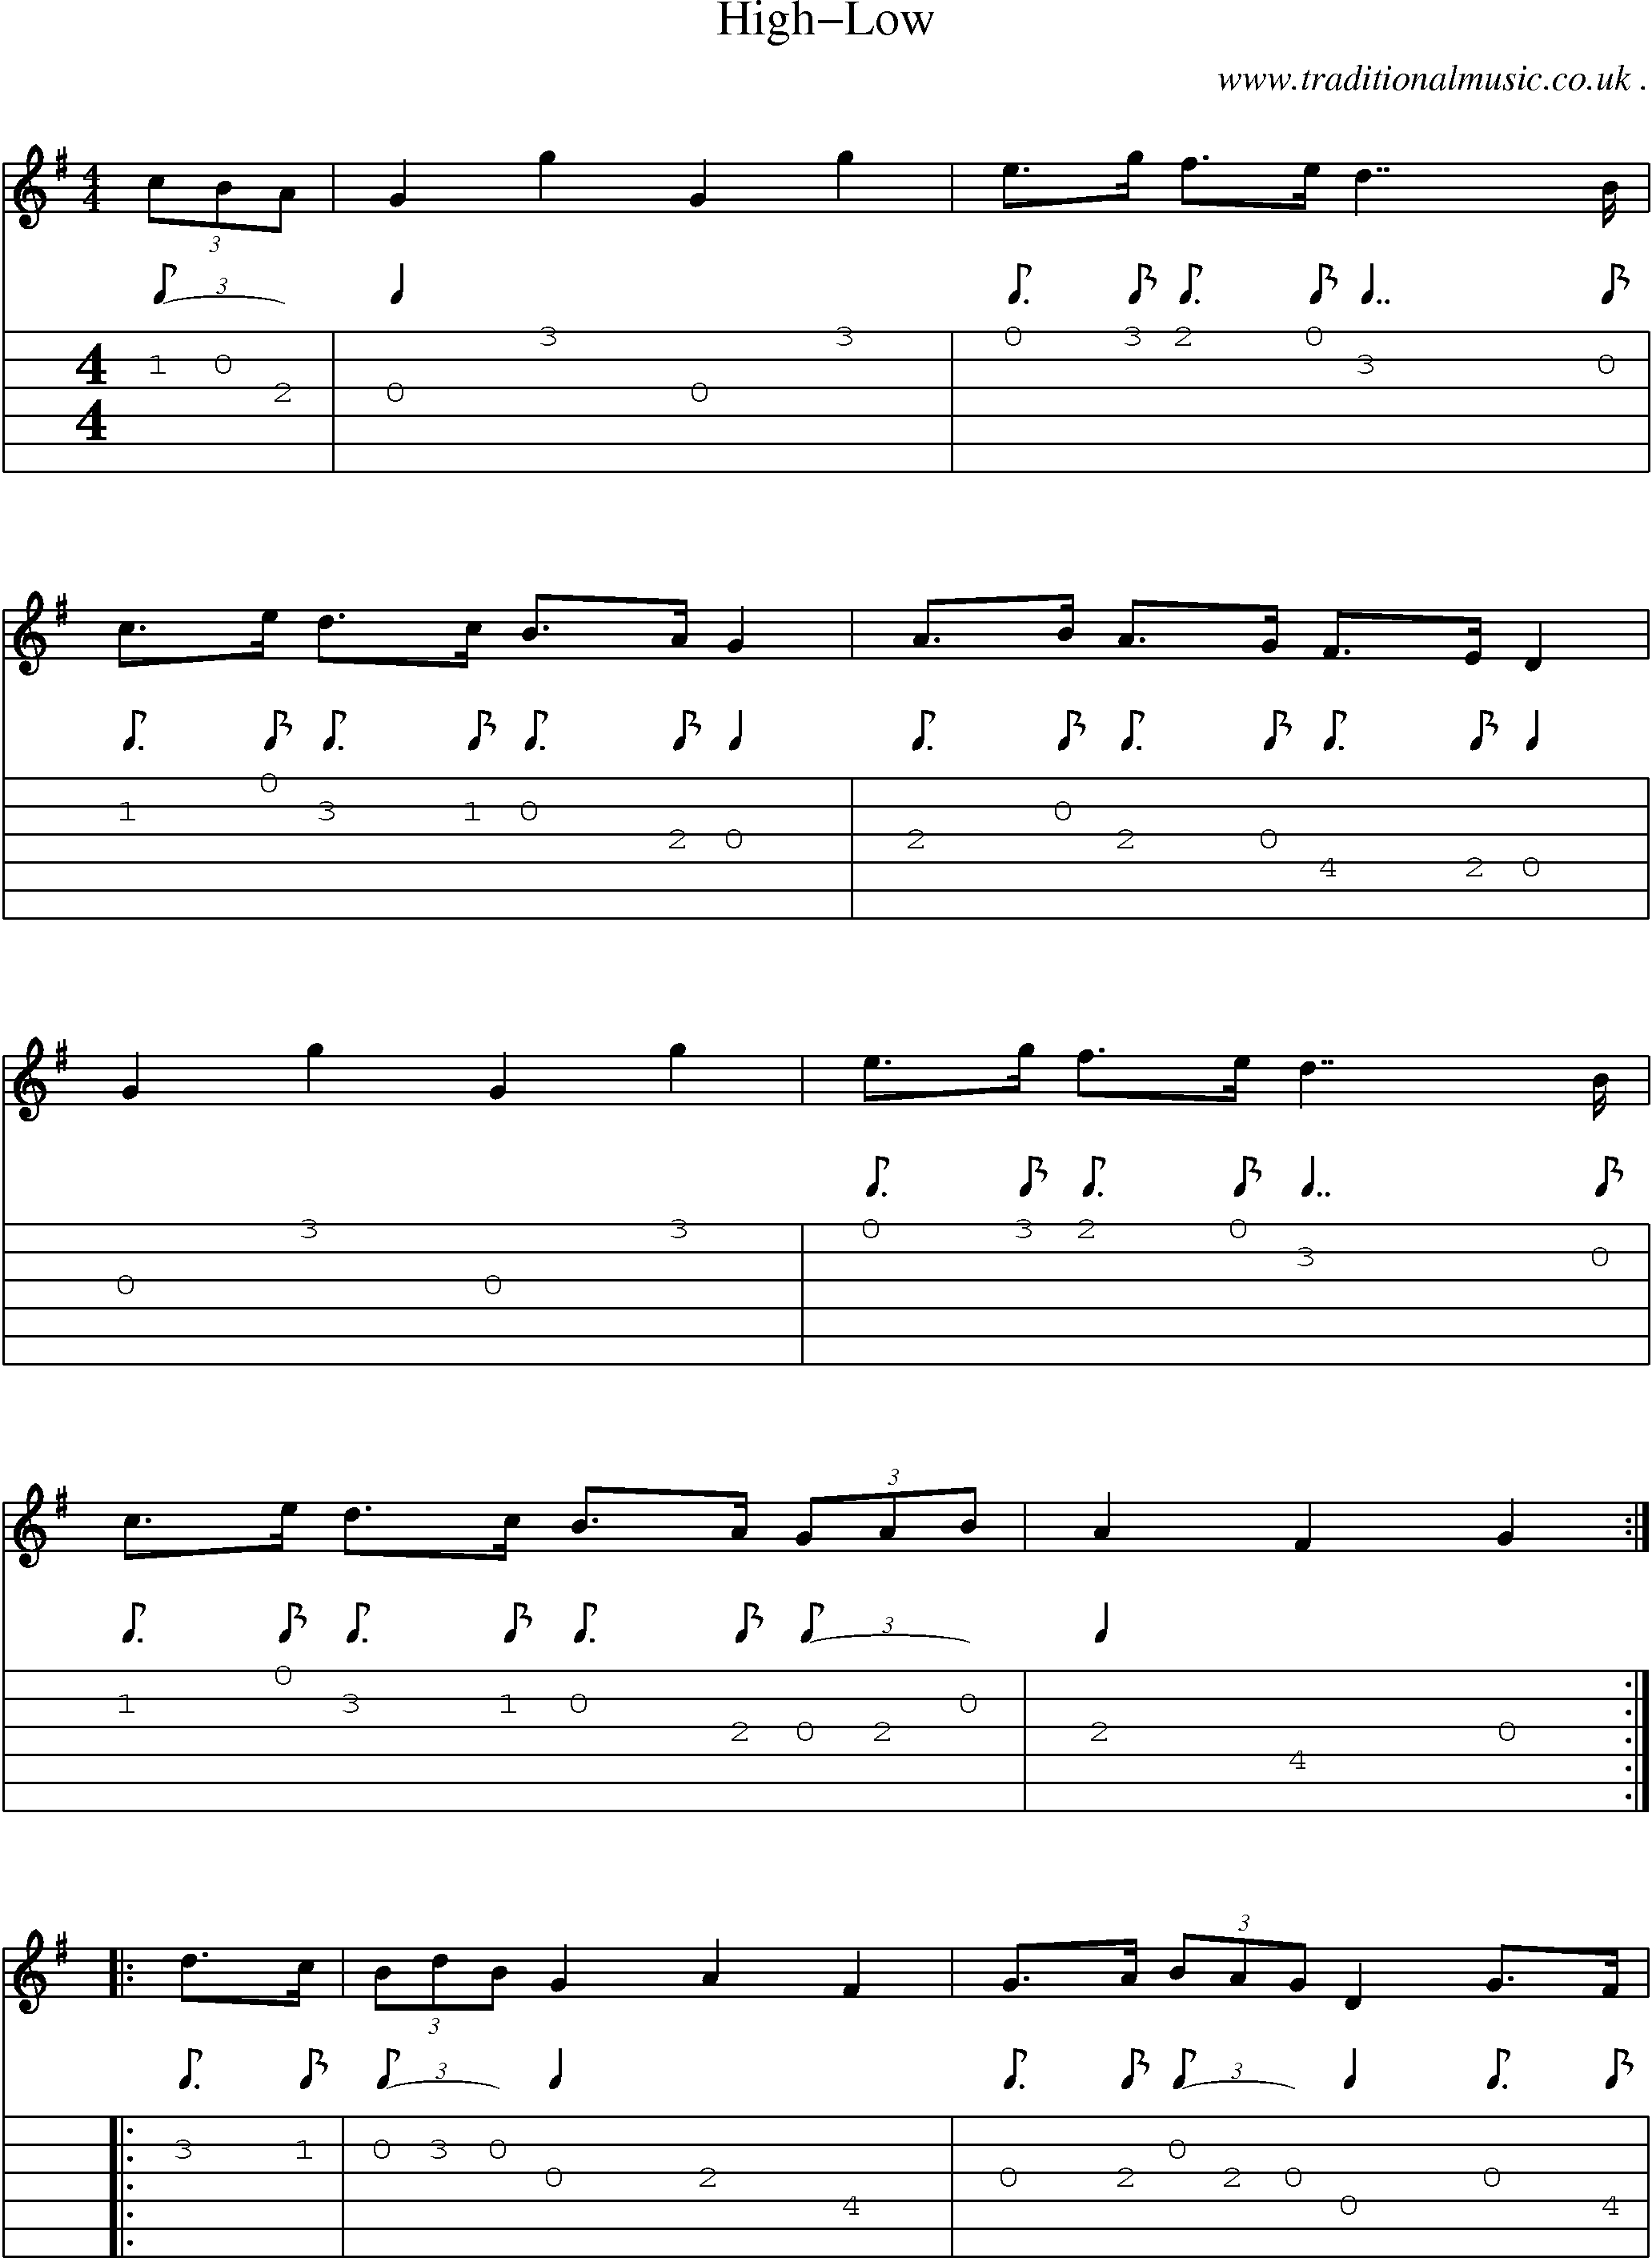 Sheet-Music and Guitar Tabs for High-low